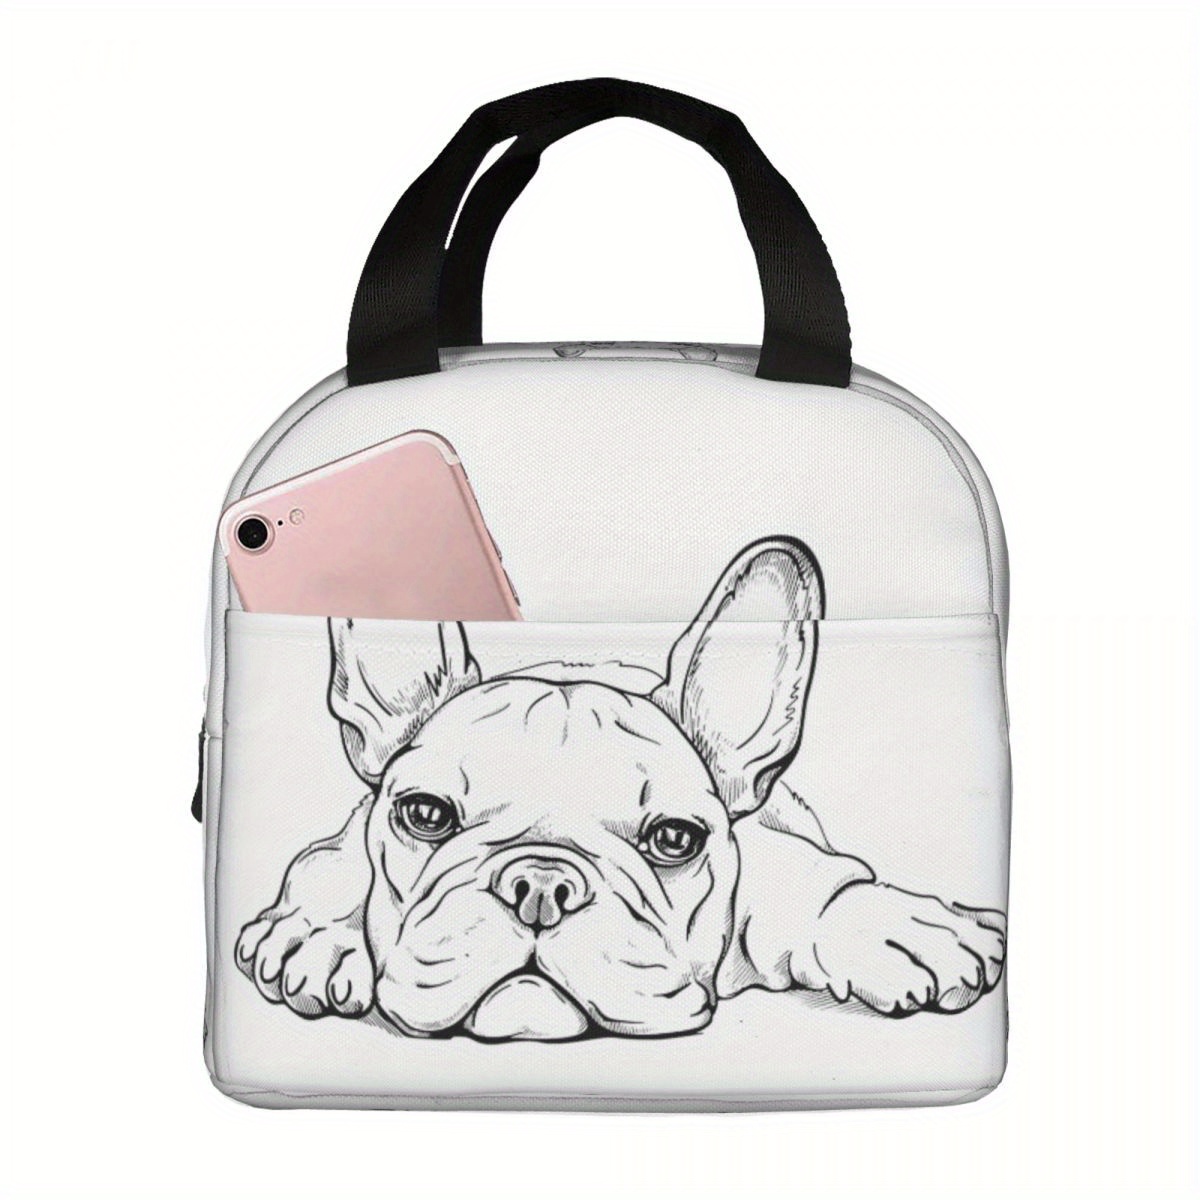 

French Bulldog Insulated Lunch Bag, Reusable Oxford Cloth Meal Tote For Women, Men, Boys, Girls - Portable Hand Washable Rectangle Lunch Box For Work, School, Picnic